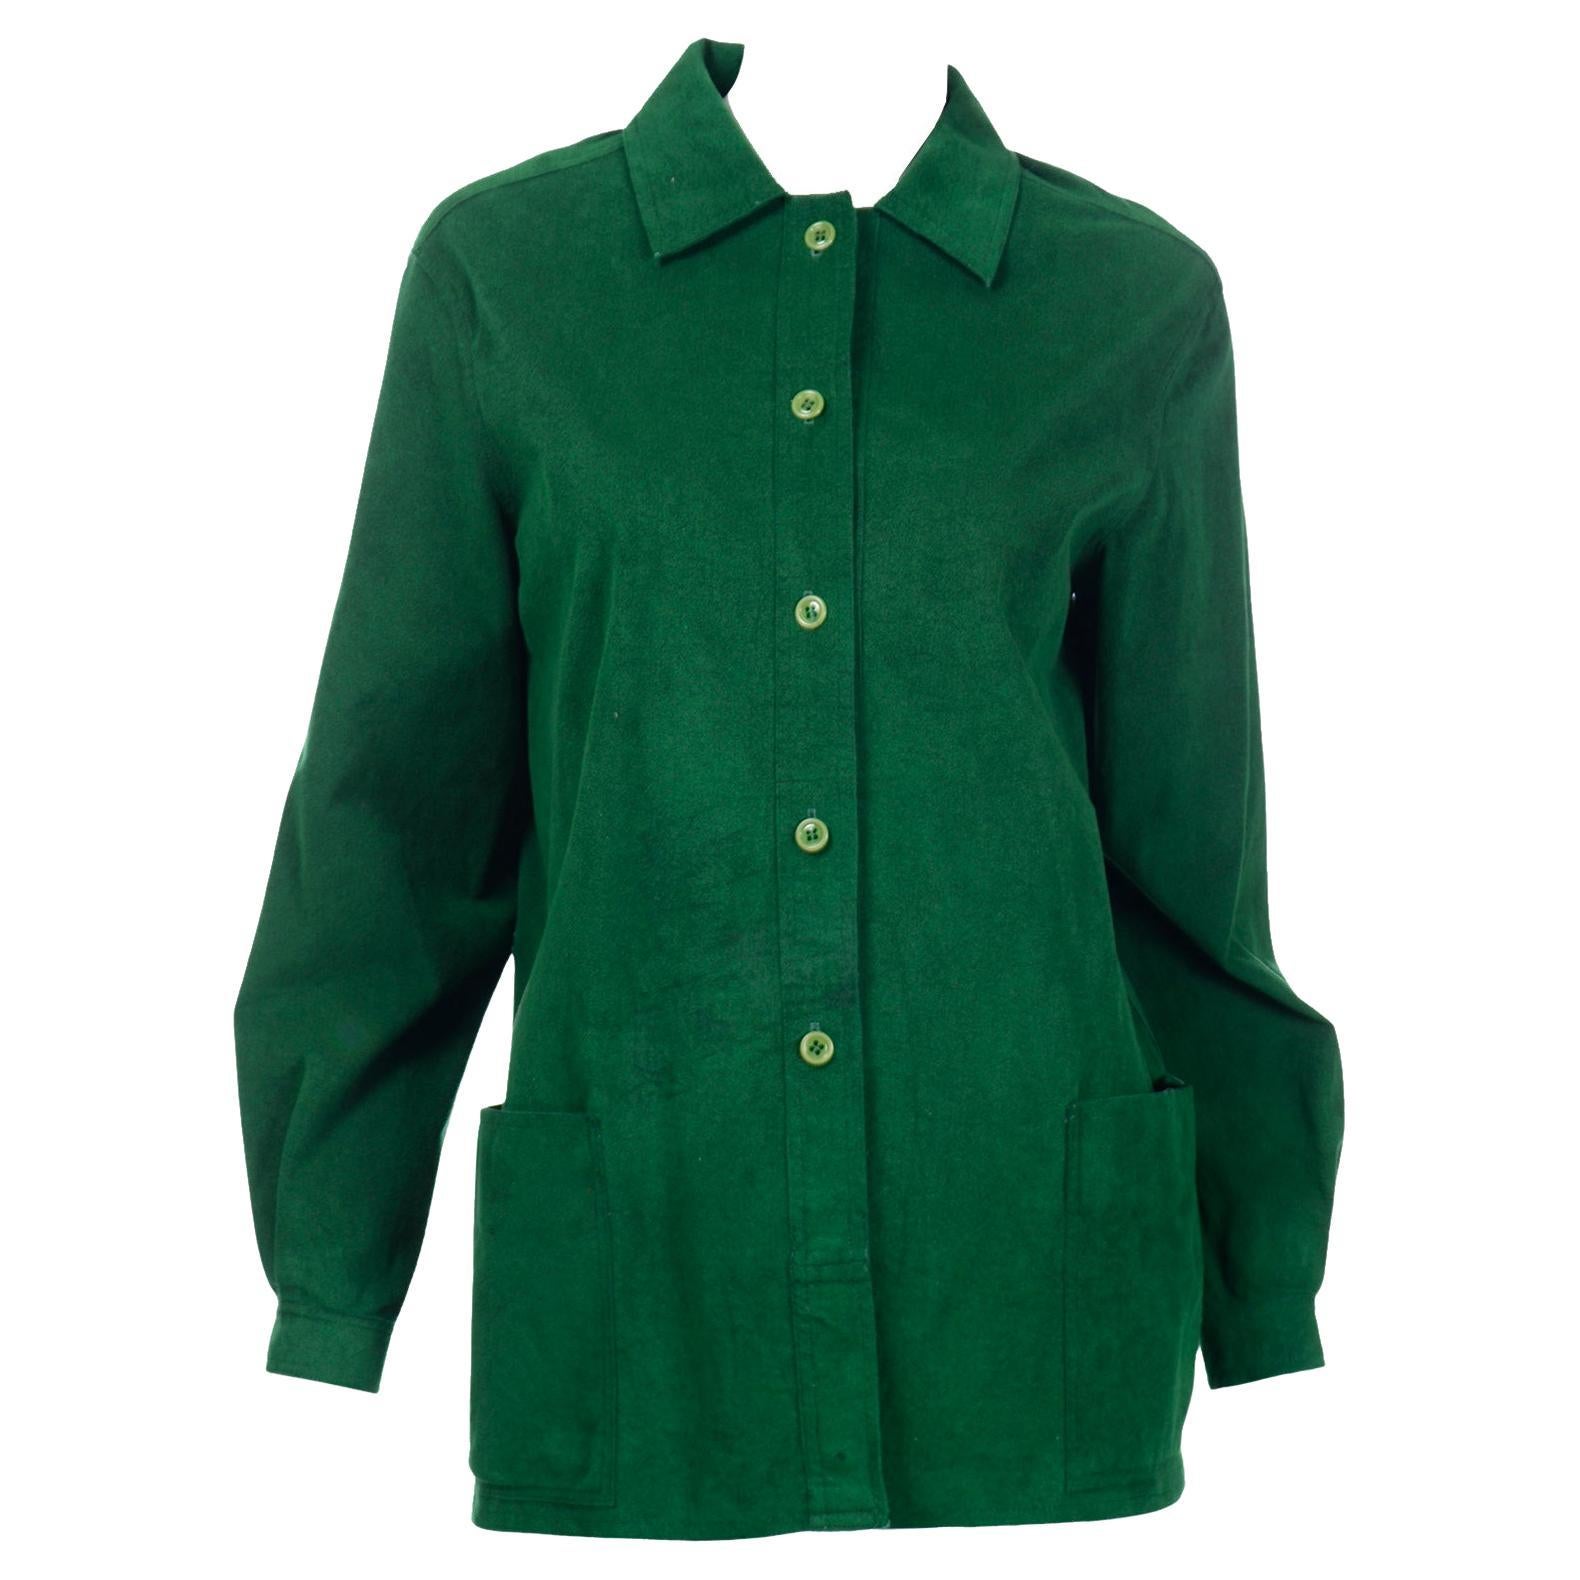 1970s Halston Green Ultrasuede Button Front Chore Jacket Style Shirt